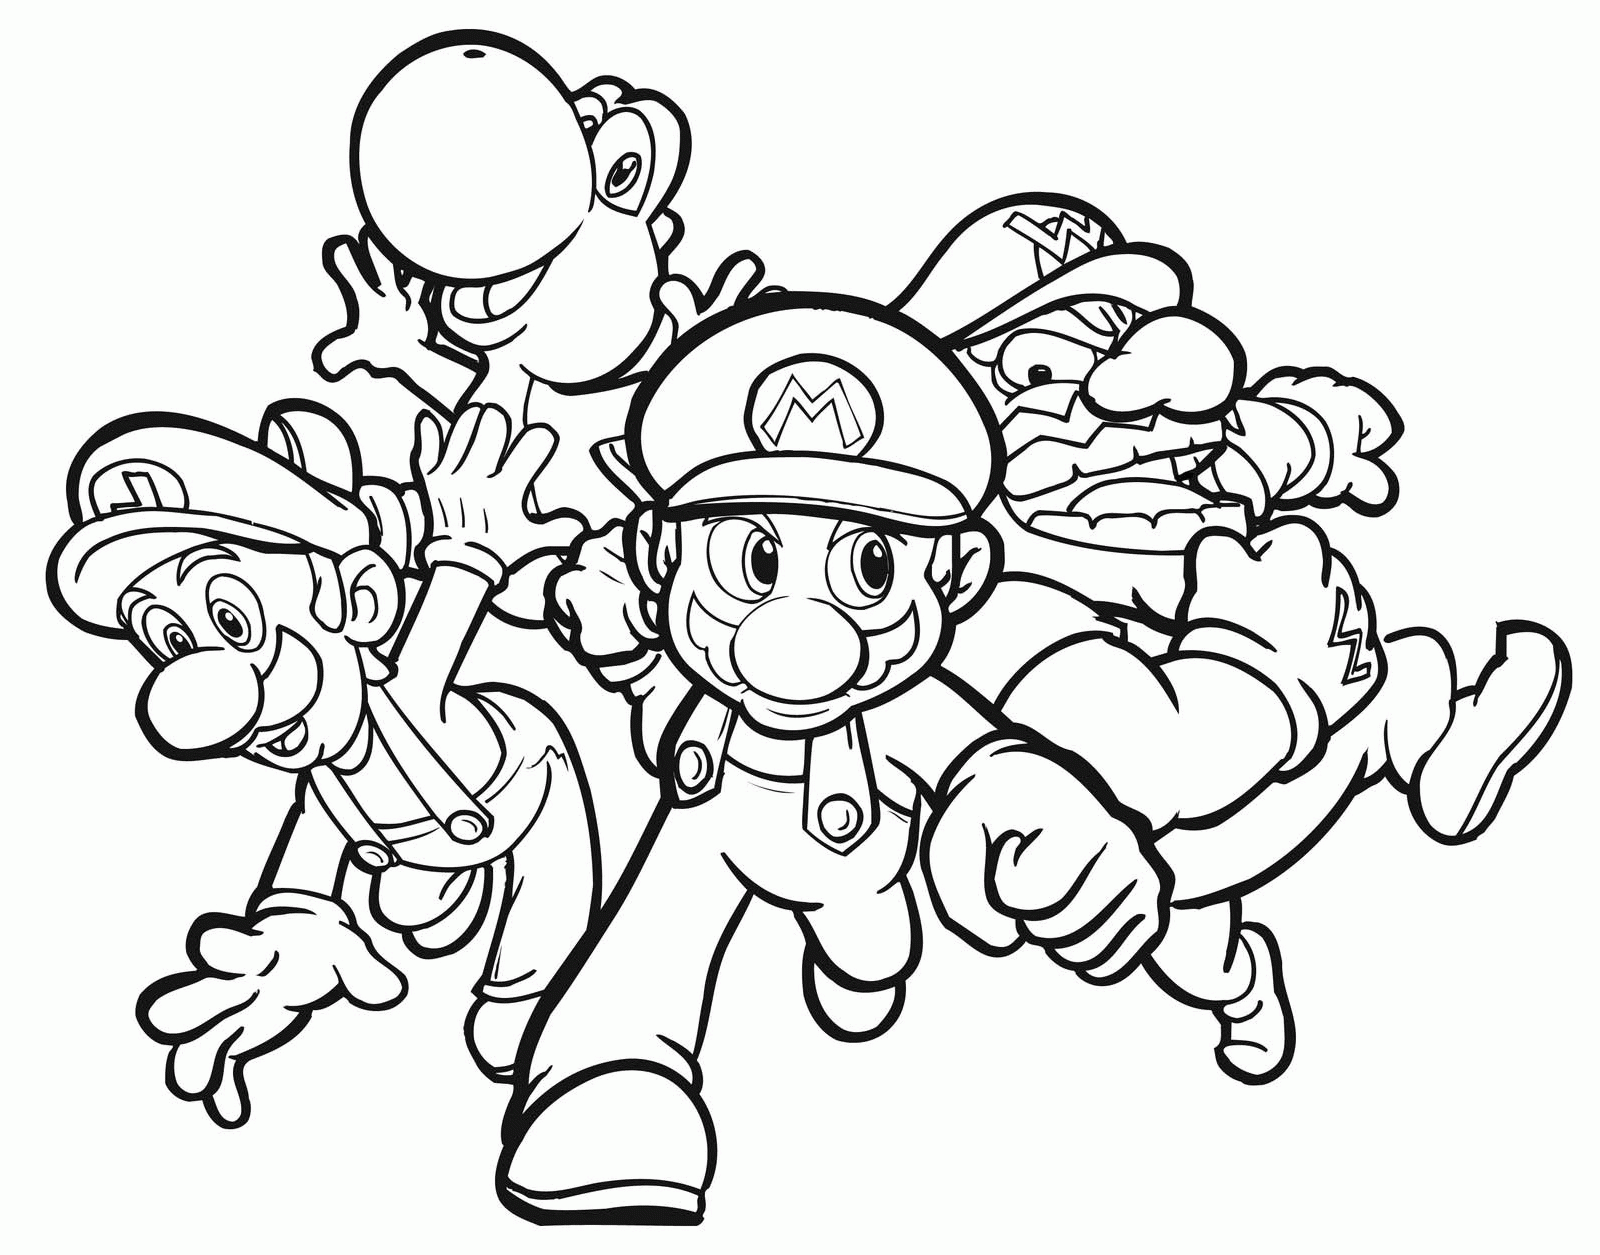 Coloring Sheeto And Luigi Pages To Print For Kids Baby Mansion Adults Free  – Approachingtheelephant